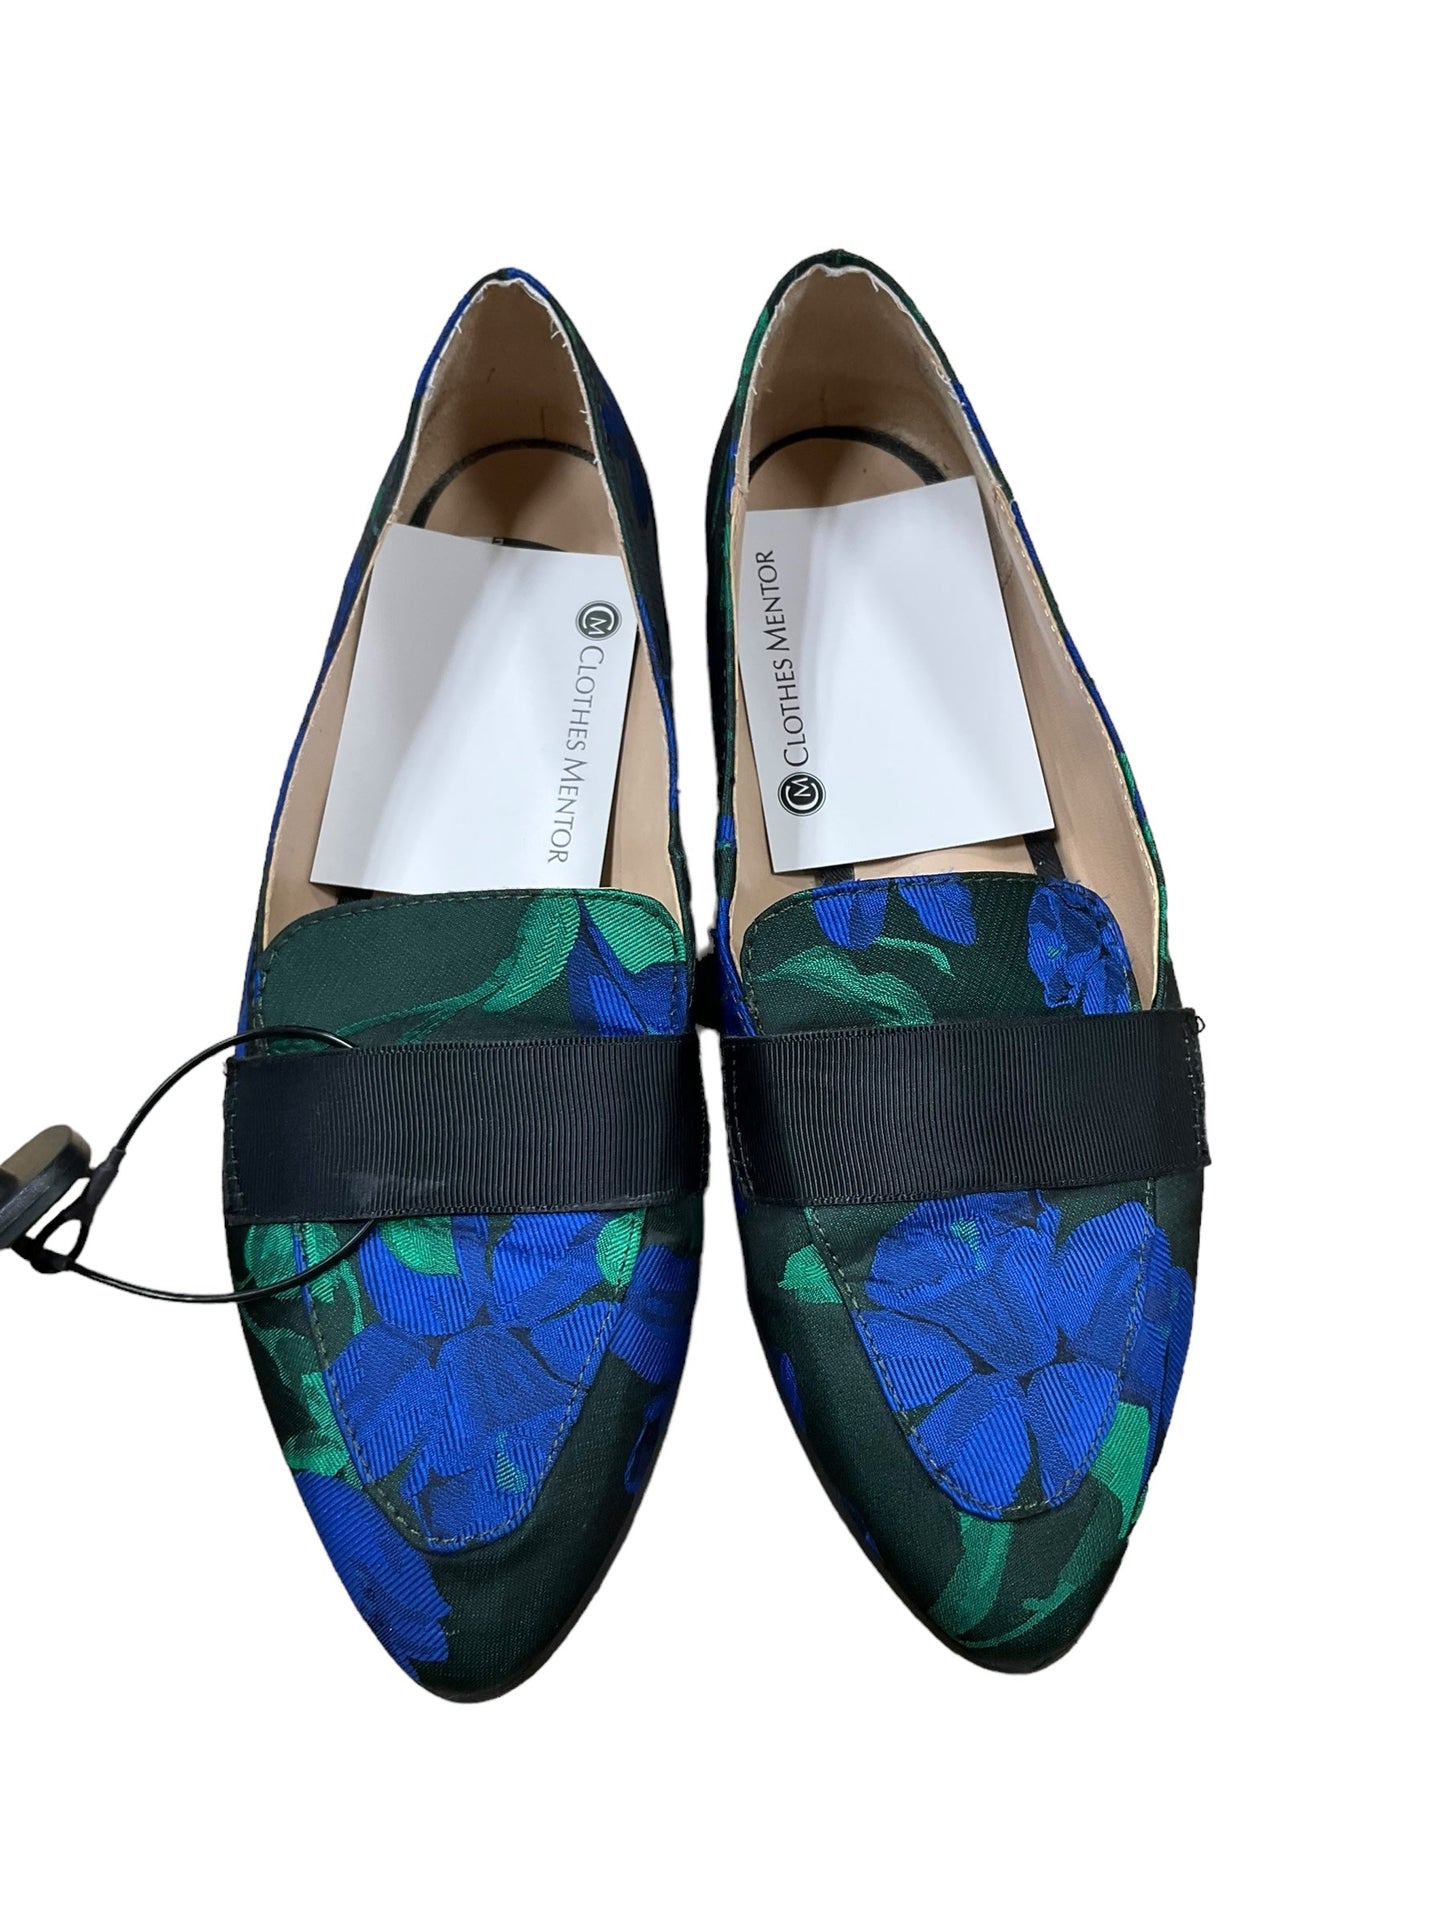 Blue & Green Shoes Flats Kelly And Katie, Size 7